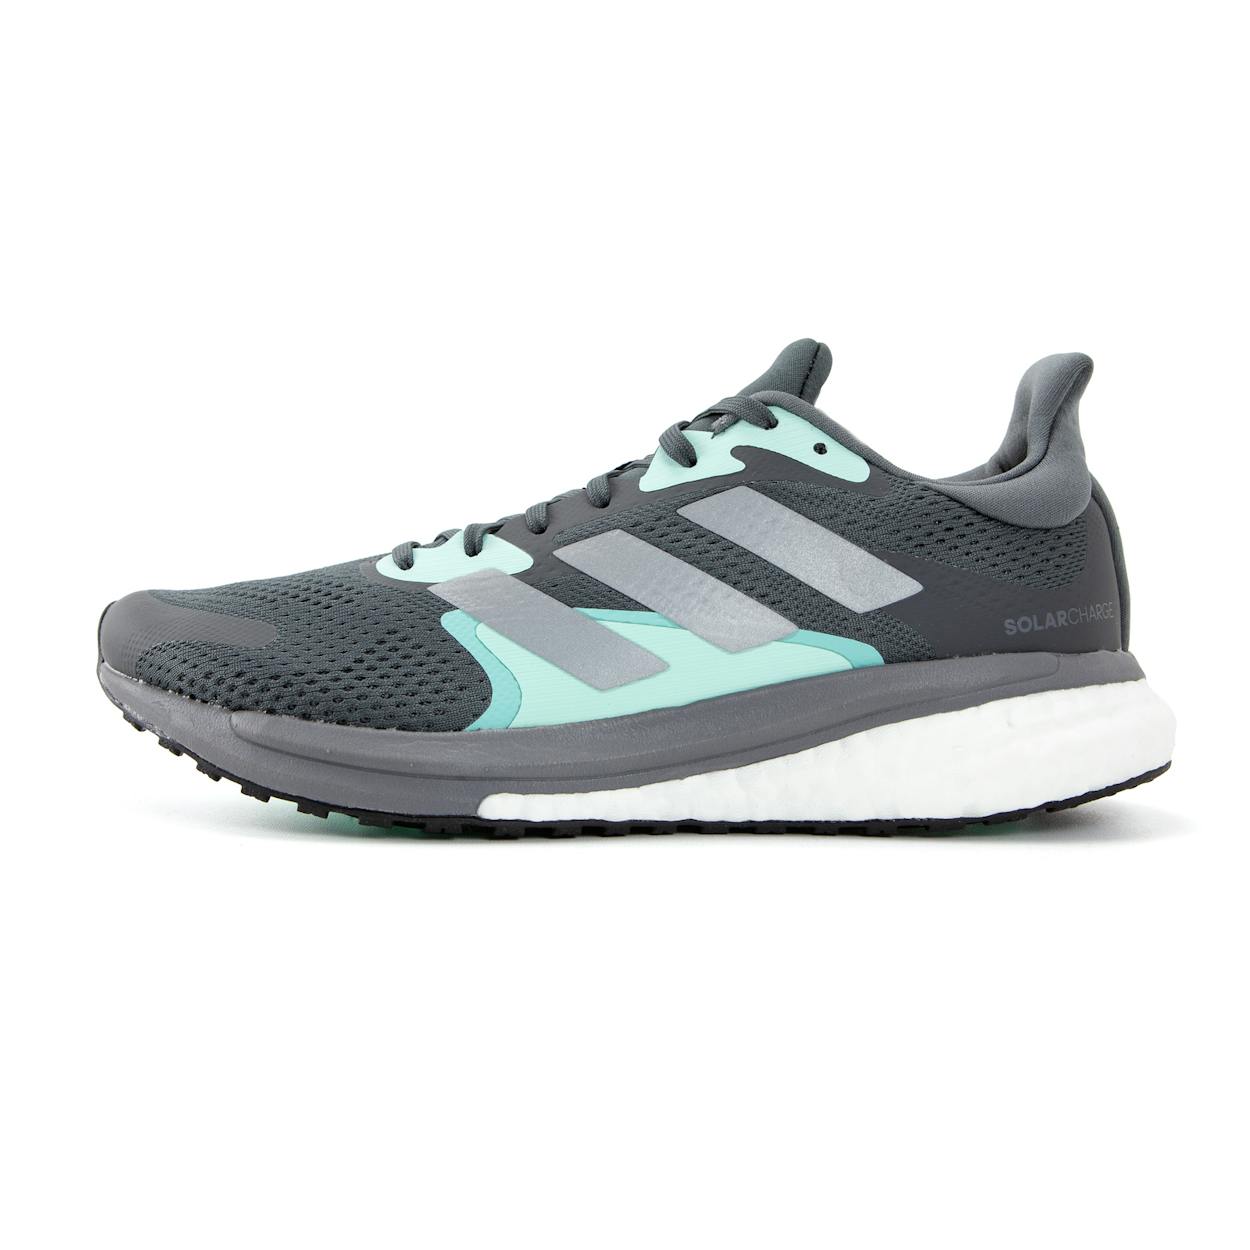 Celsius Mobiliseren replica adidas Solarcharge Dames | All4running